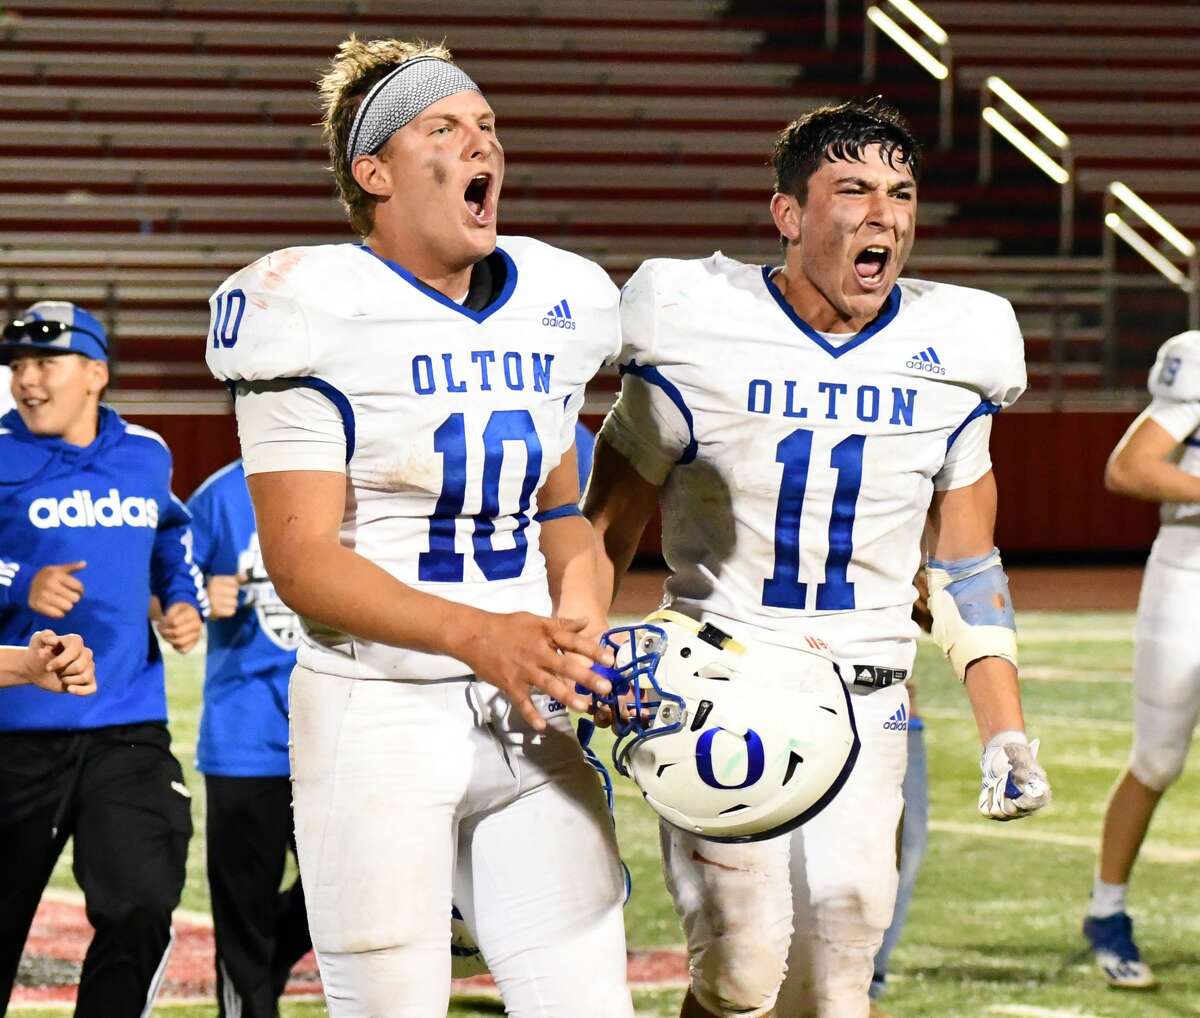 Olton knocked off New Deal 35-33 in their Class 2A Division I bi-district football playoff game on Thursday, Nov. 12, 2020 in Lobo Stadium in Levelland.